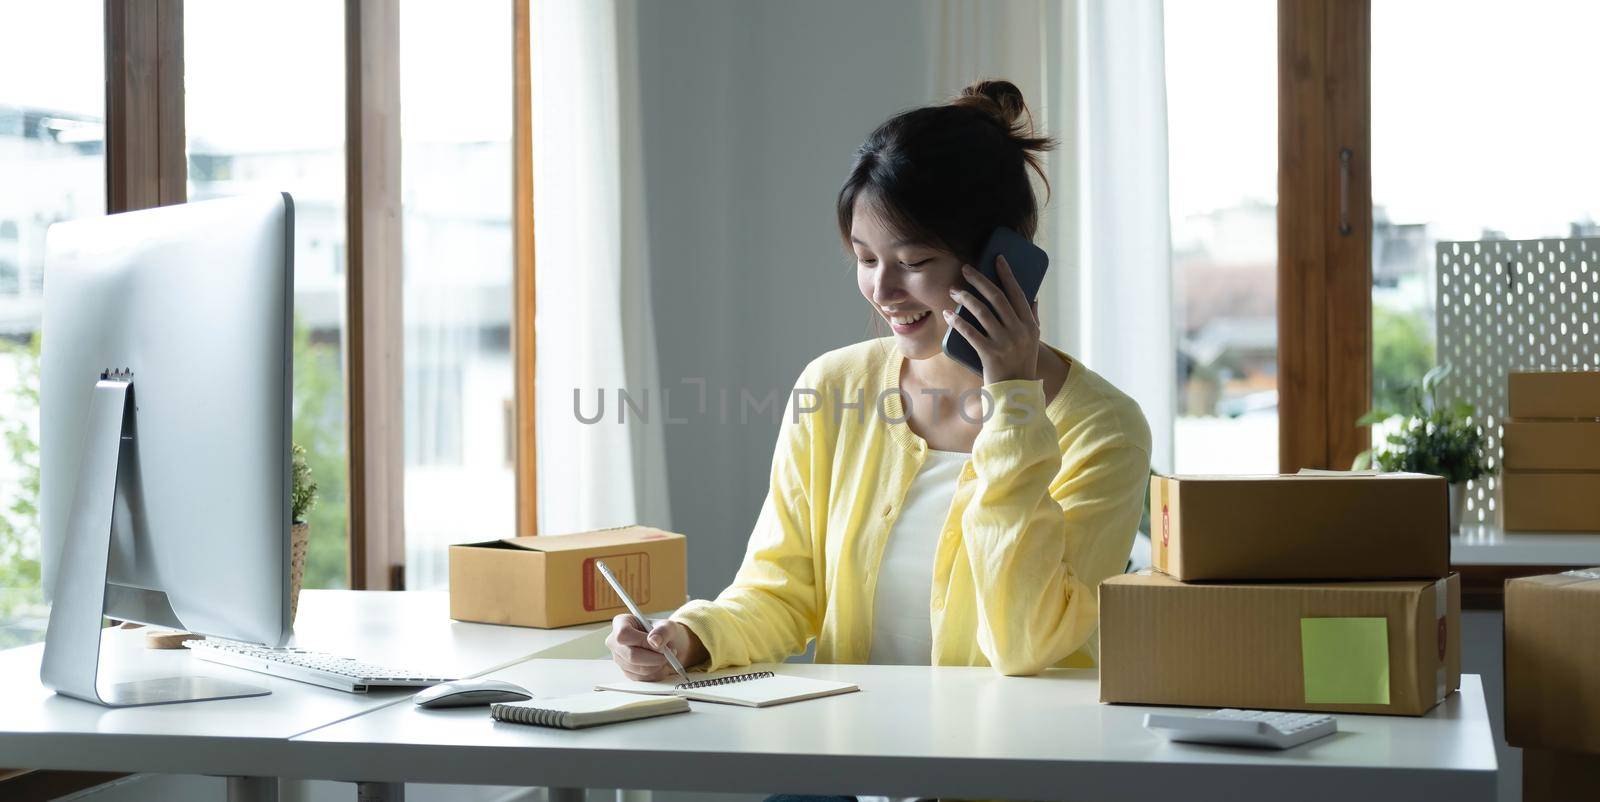 A portrait of Asian woman, e-commerce employee sitting in the office full of packages on the table using a laptop and smartphone, for SME business, e-commerce, technology and delivery business. by wichayada